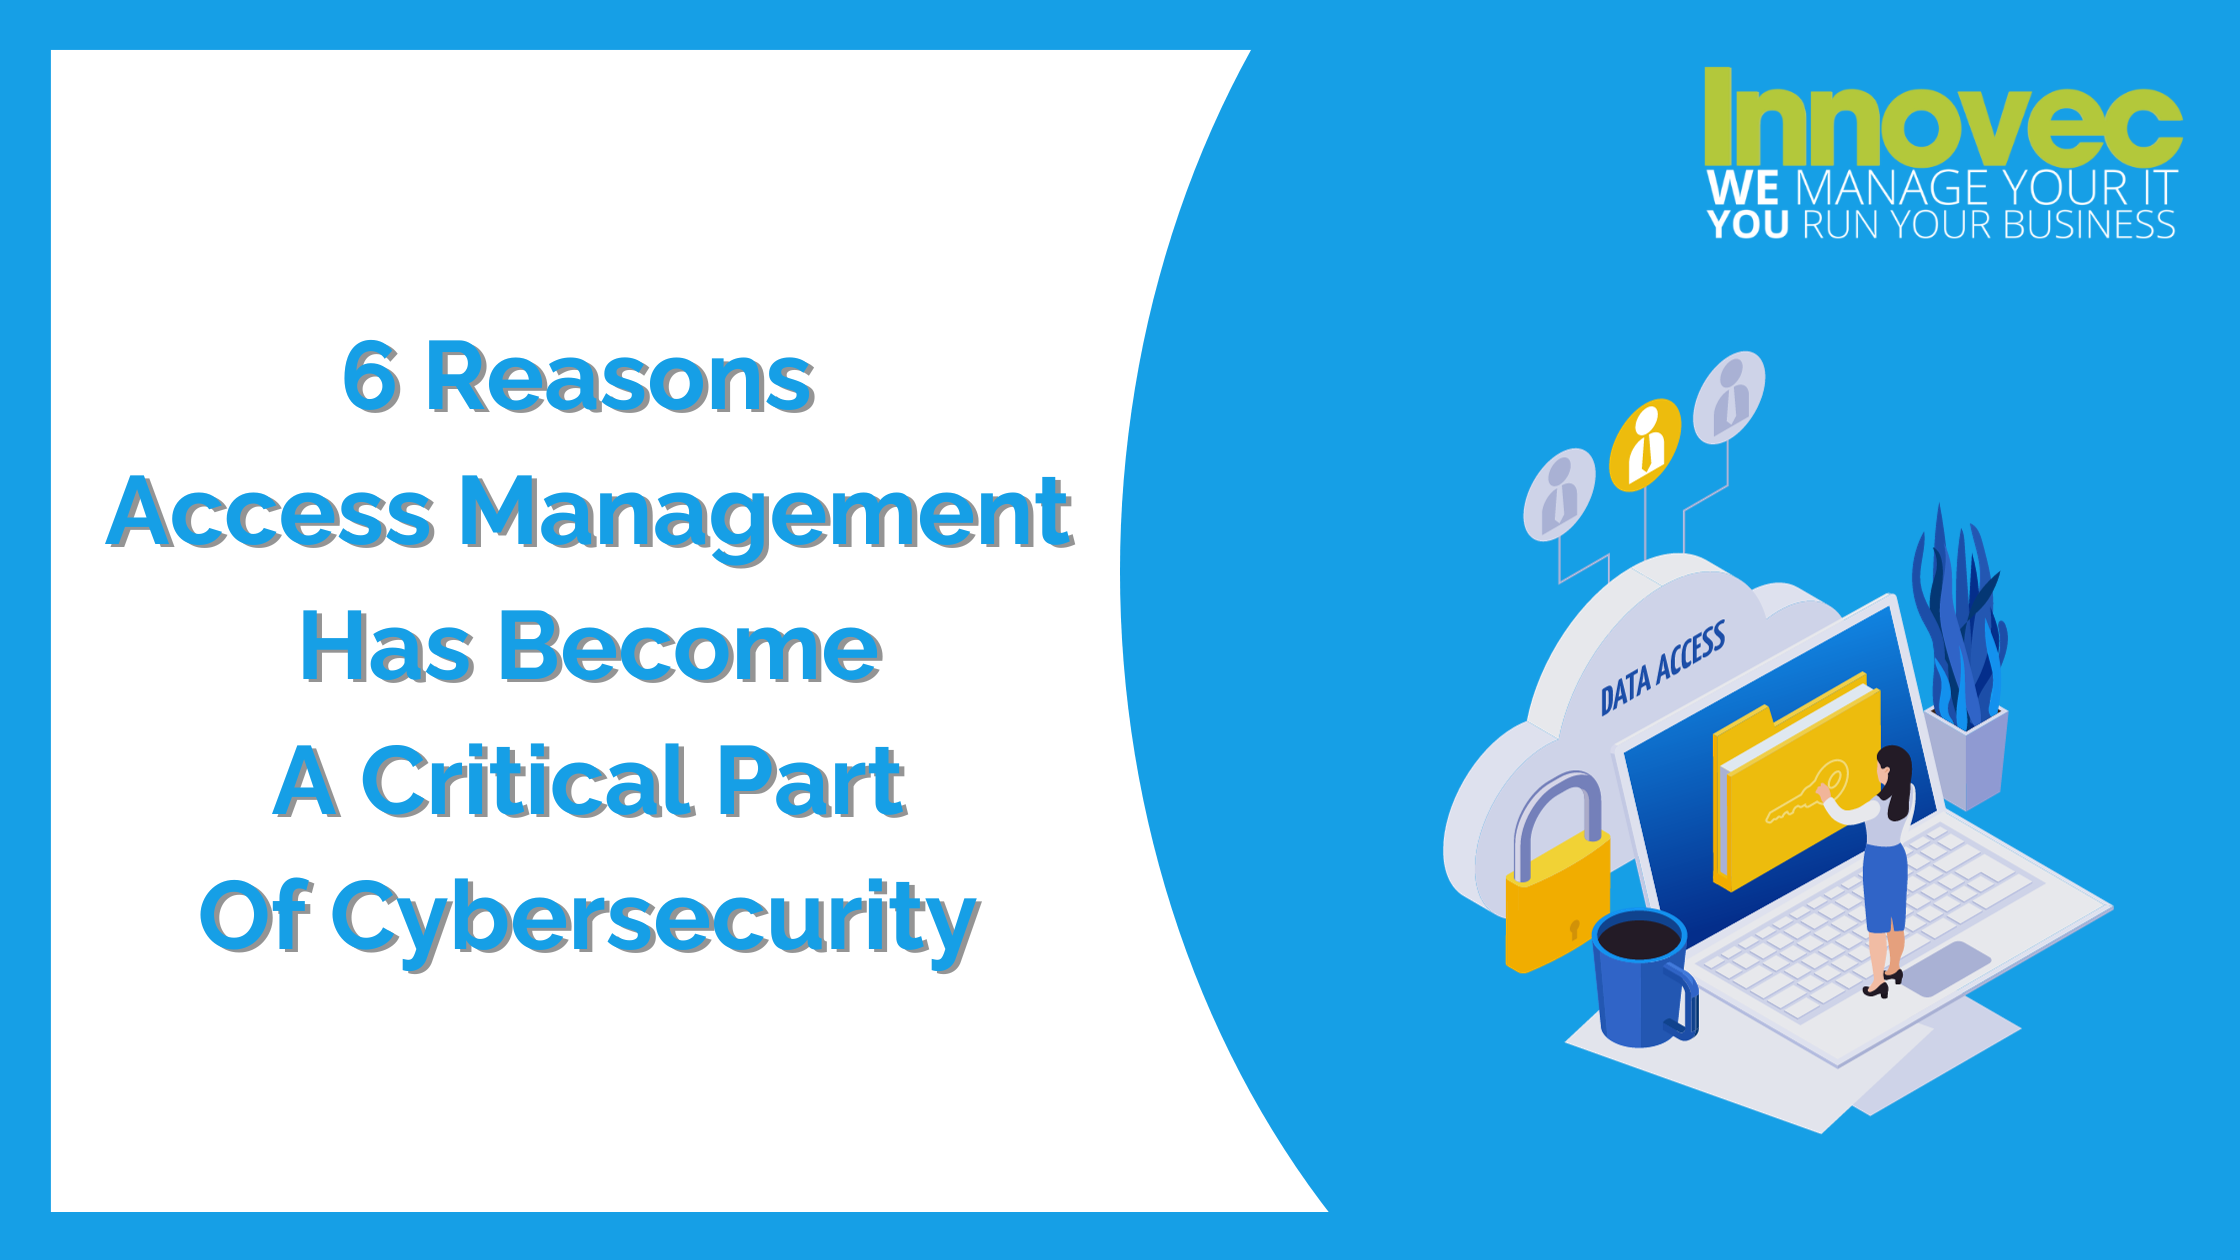 6 Reasons Why Access Management Has Become A Critical Part Of Cybersecurity